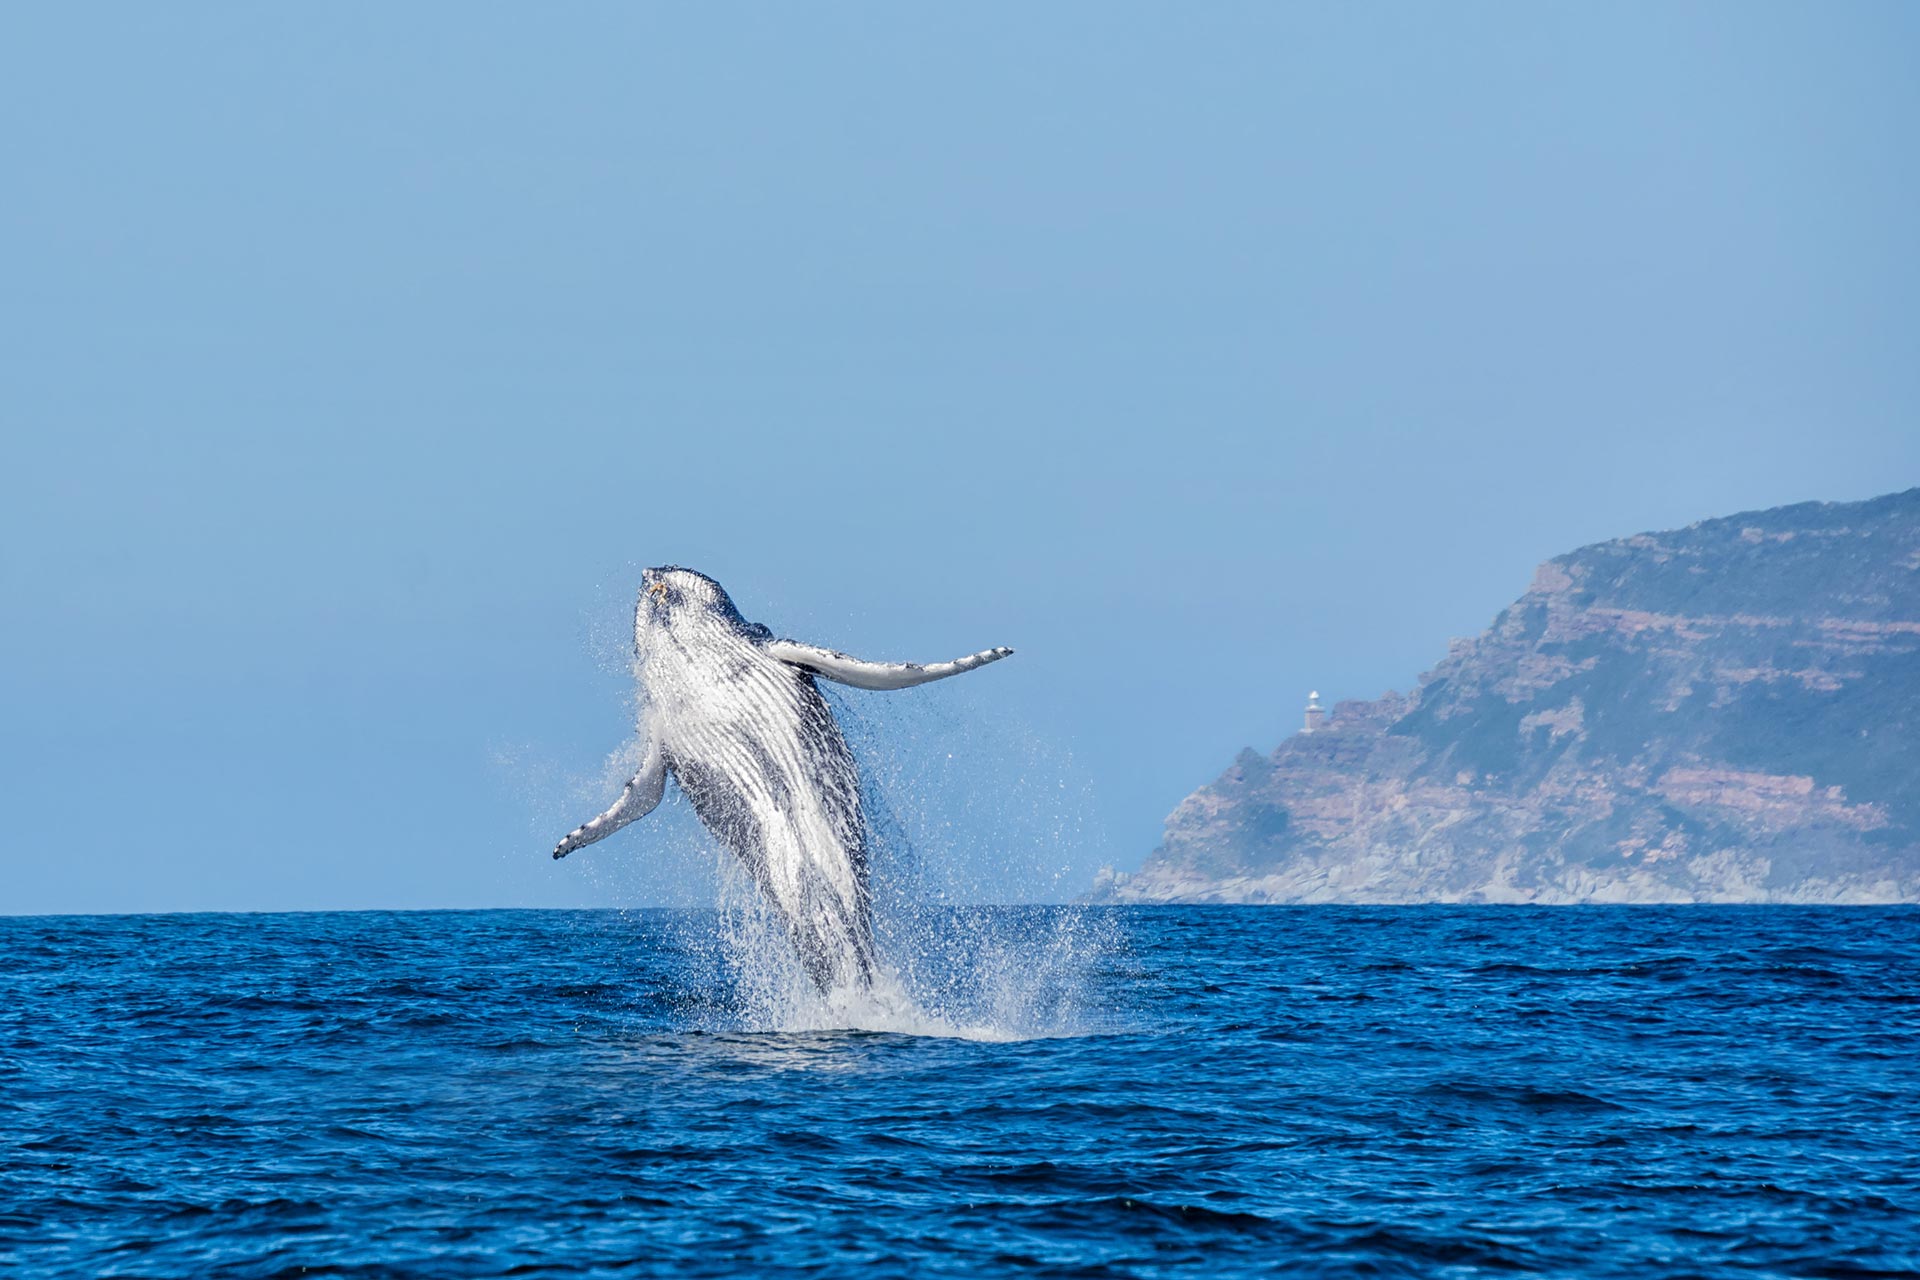 Humpback Whale jumping out of water